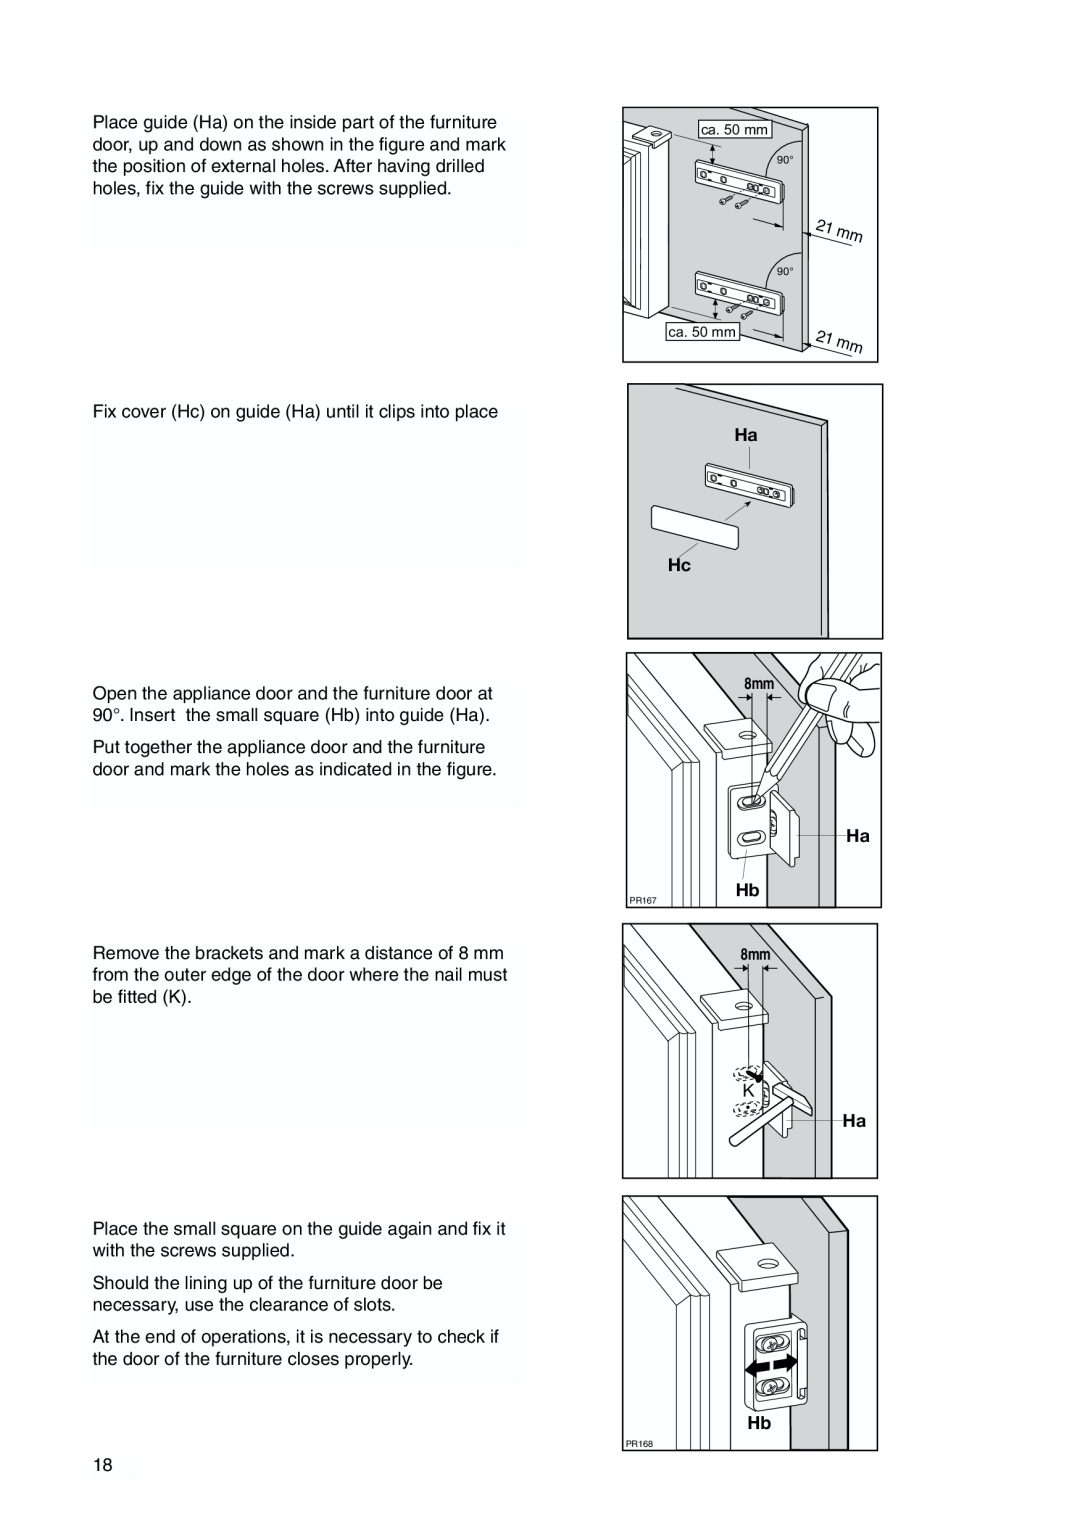 Tricity Bendix TBFF 55 installation instructions 21 m, Fix cover Hc on guide Ha until it clips into place 